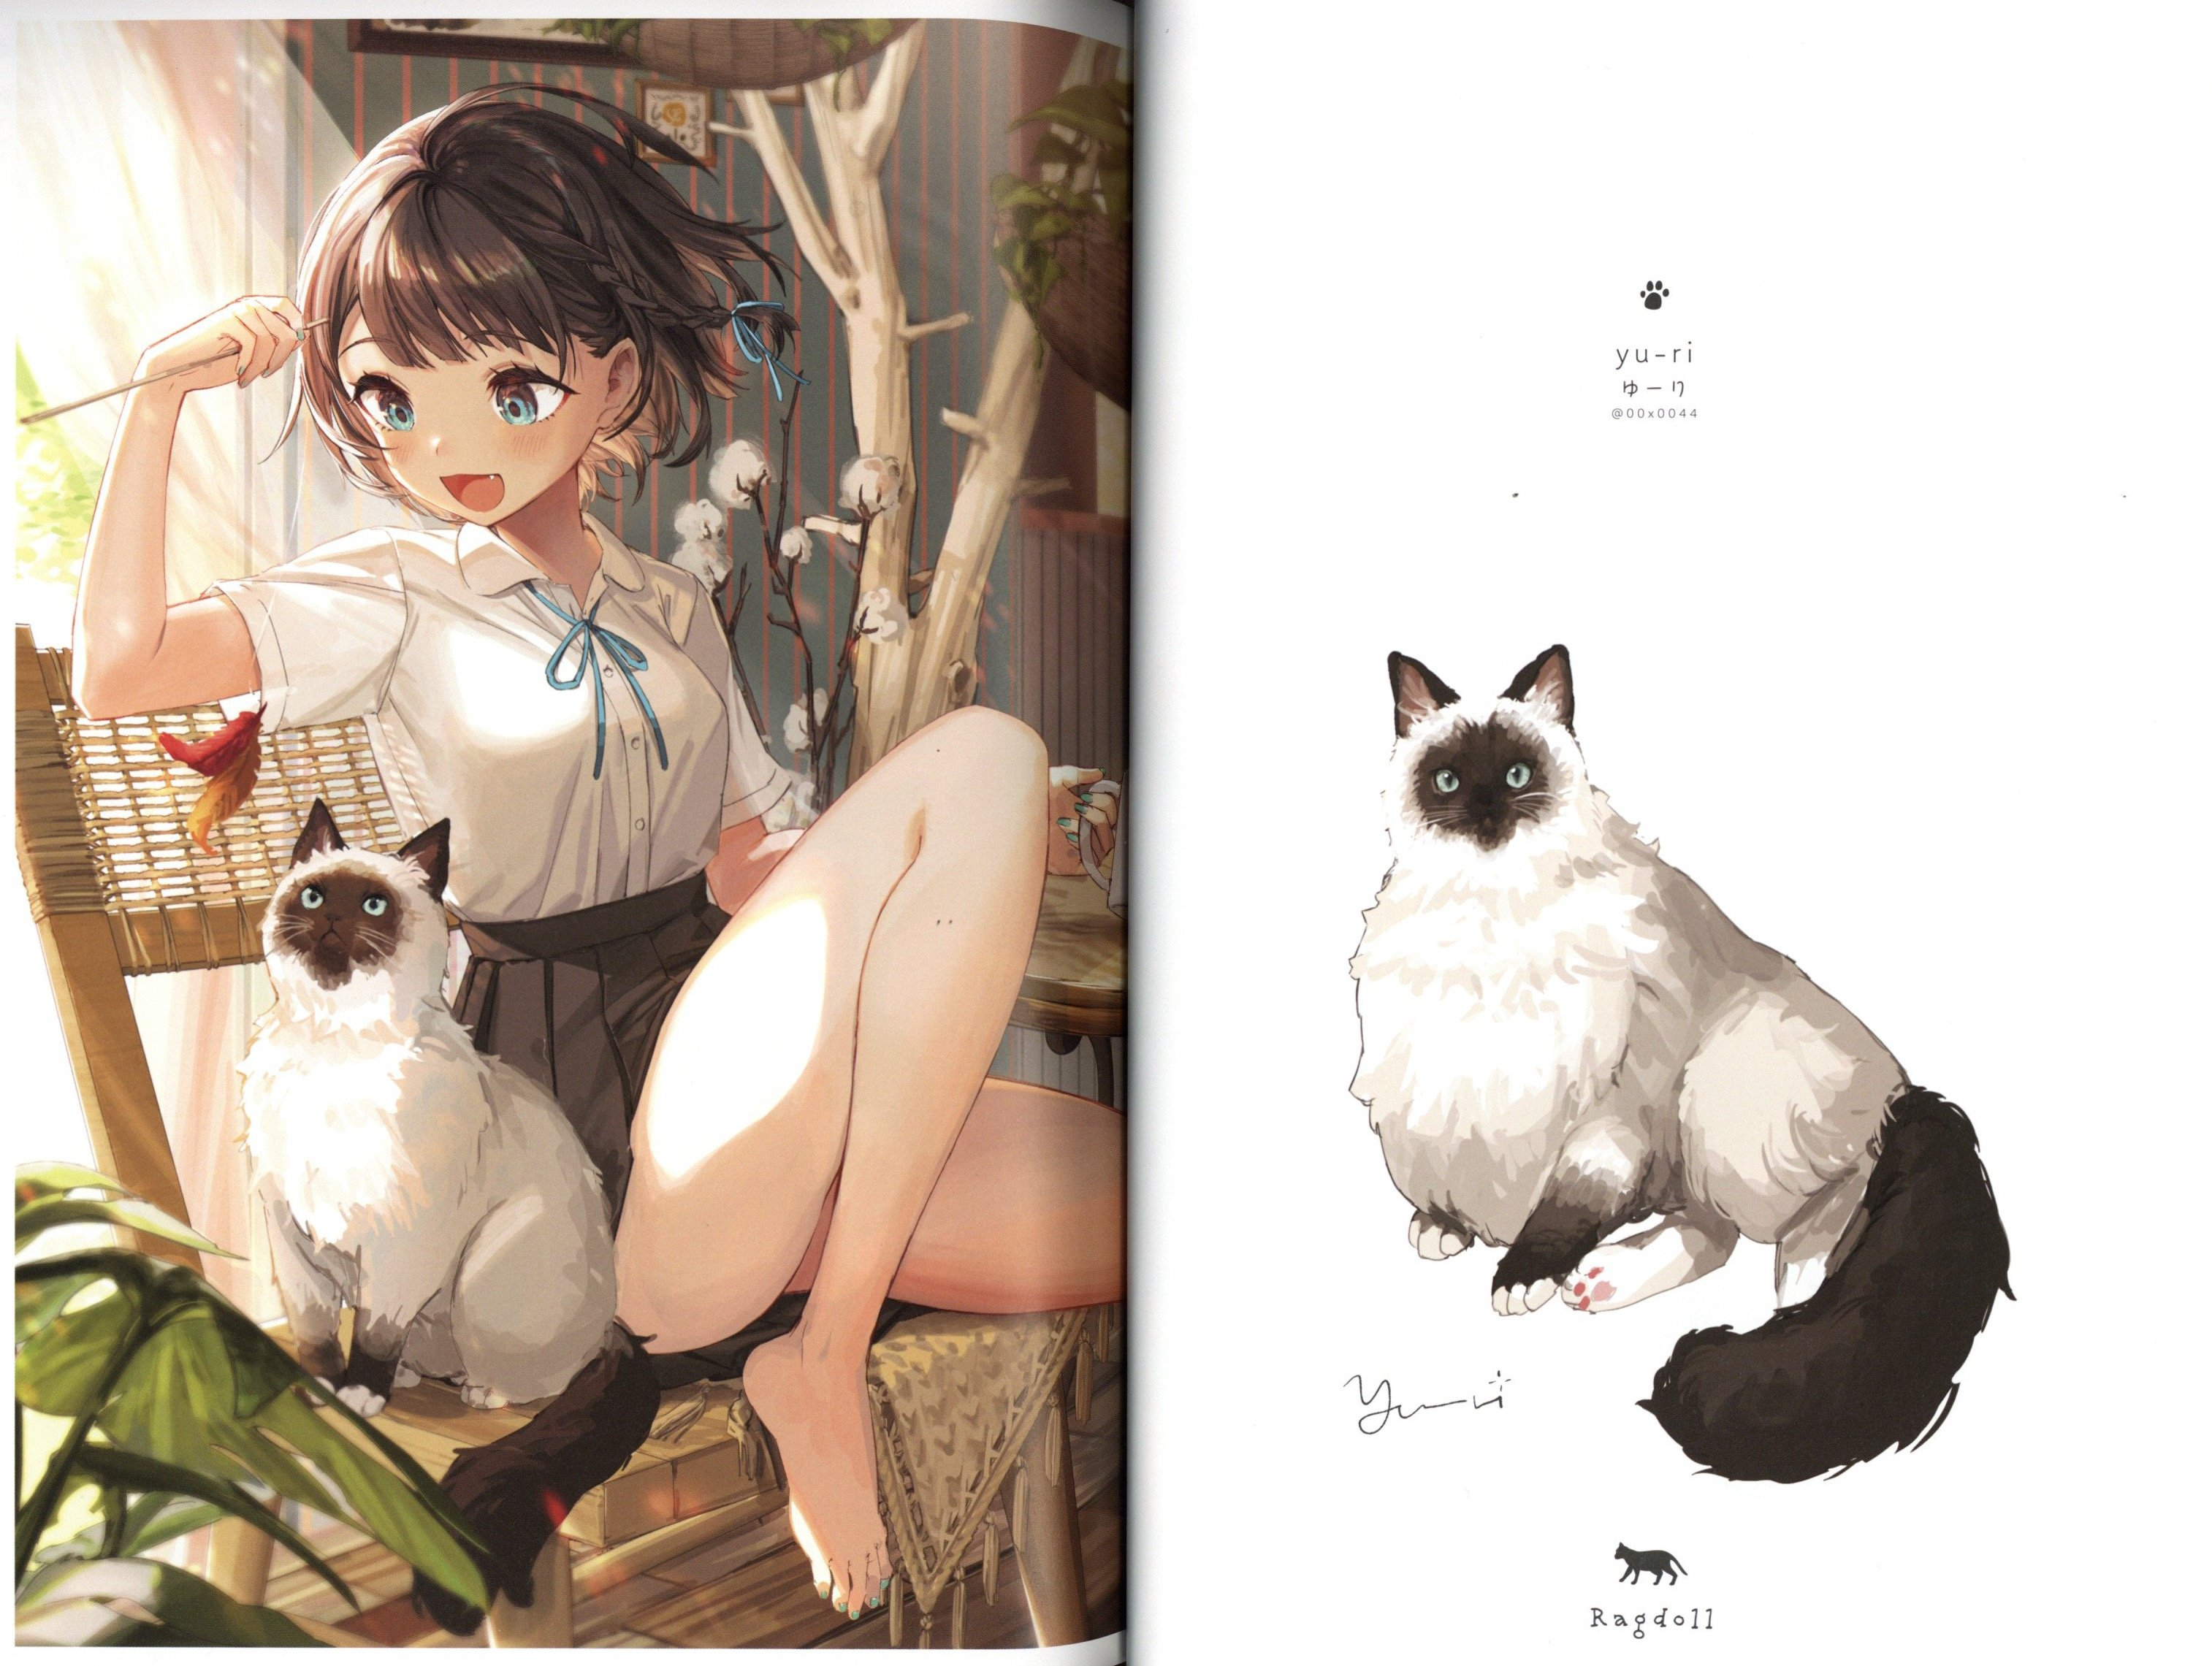 anime, anime cat and soft - image #6428637 on